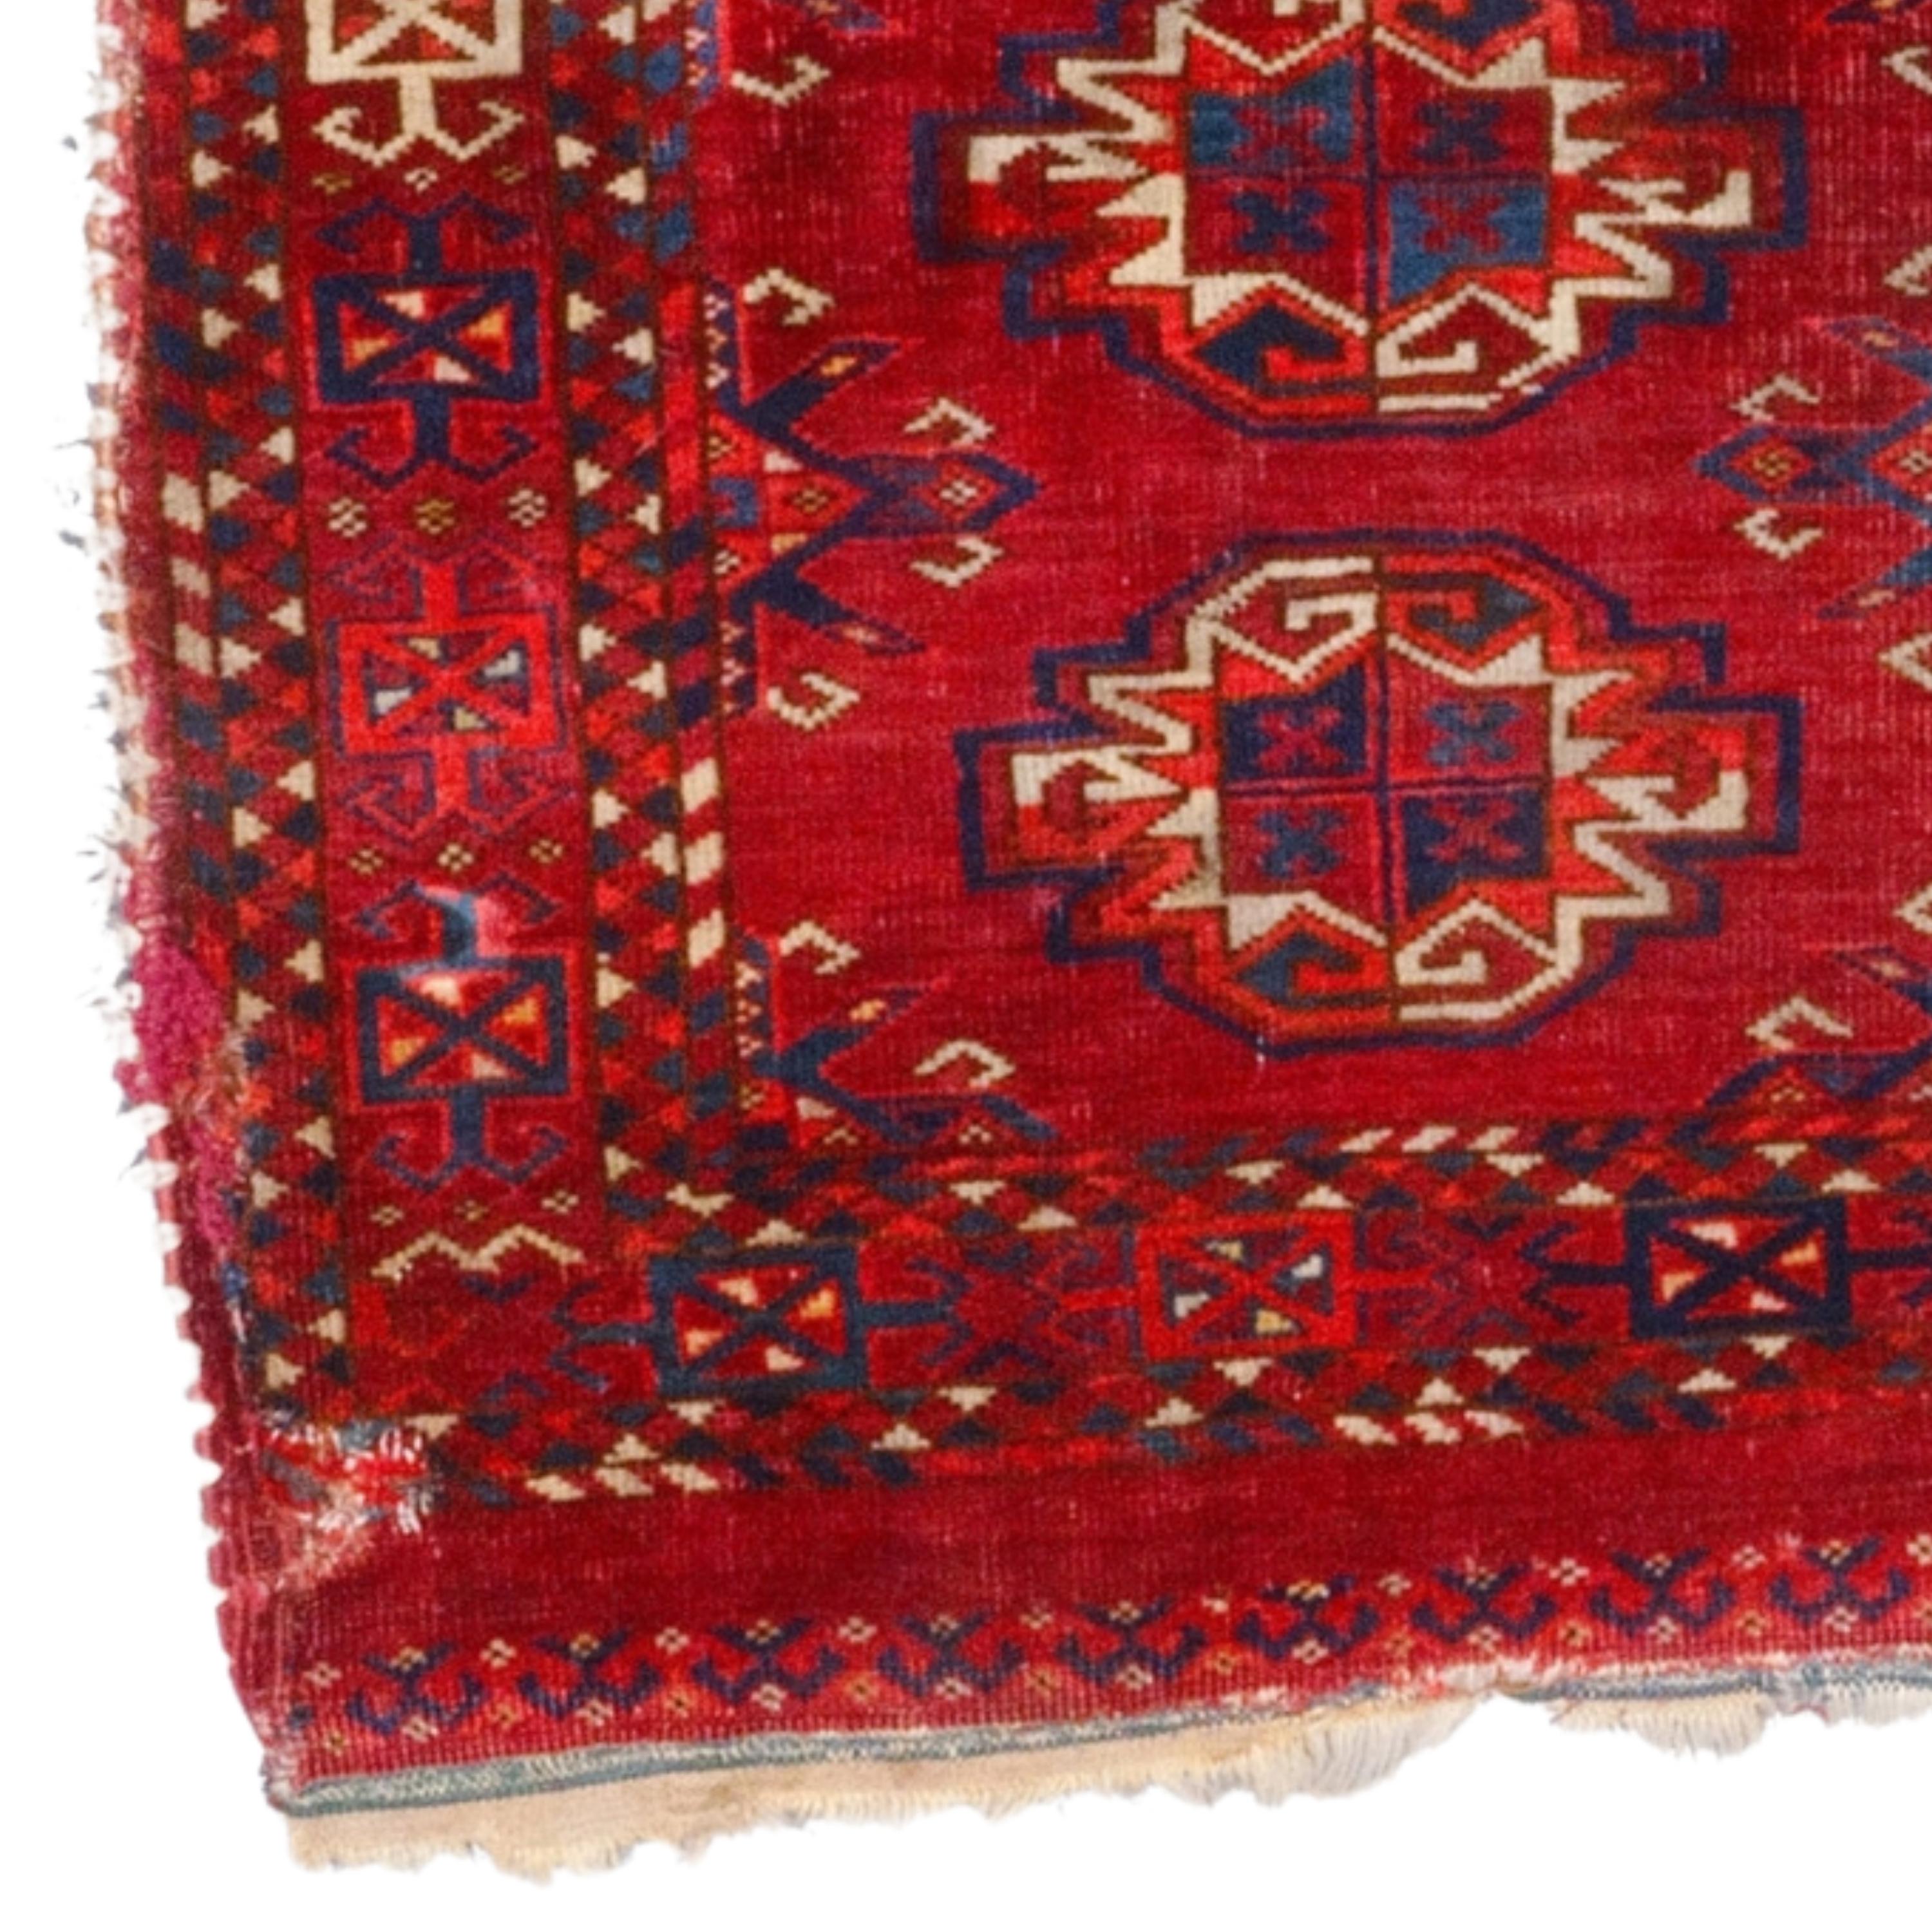 This elegant 19th century Ersari Chuval rug is a work of art that will enhance any space with its carefully chosen color palette and sophisticated patterns. Traditional motifs embroidered on a red background reveal the unique beauty of this work and